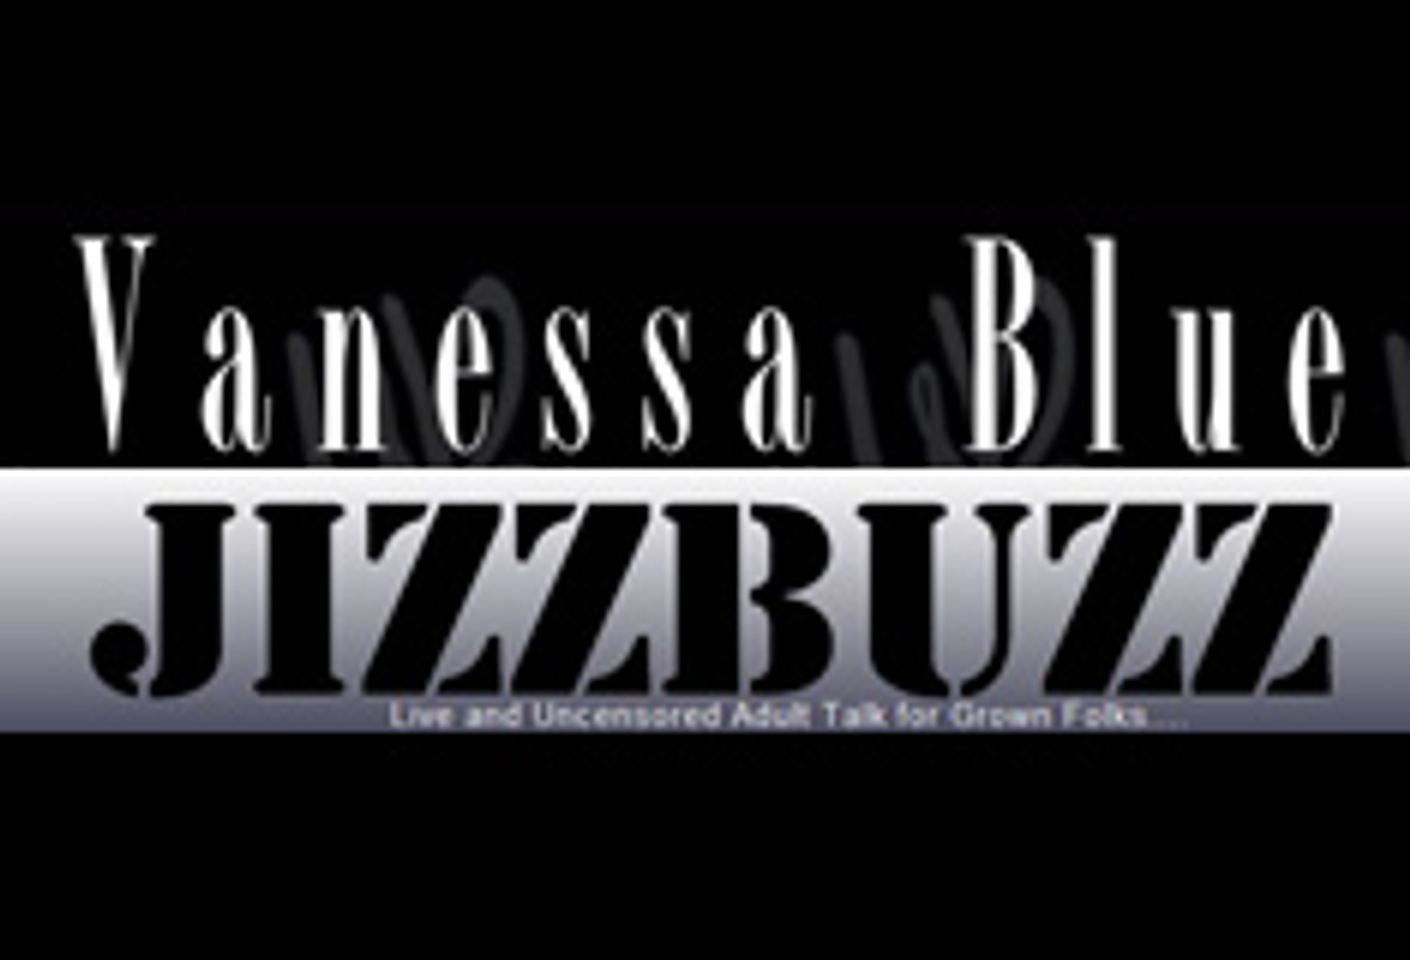 Vanessa Blue is Back With An Exciting New Radio Program—JizzBuzz